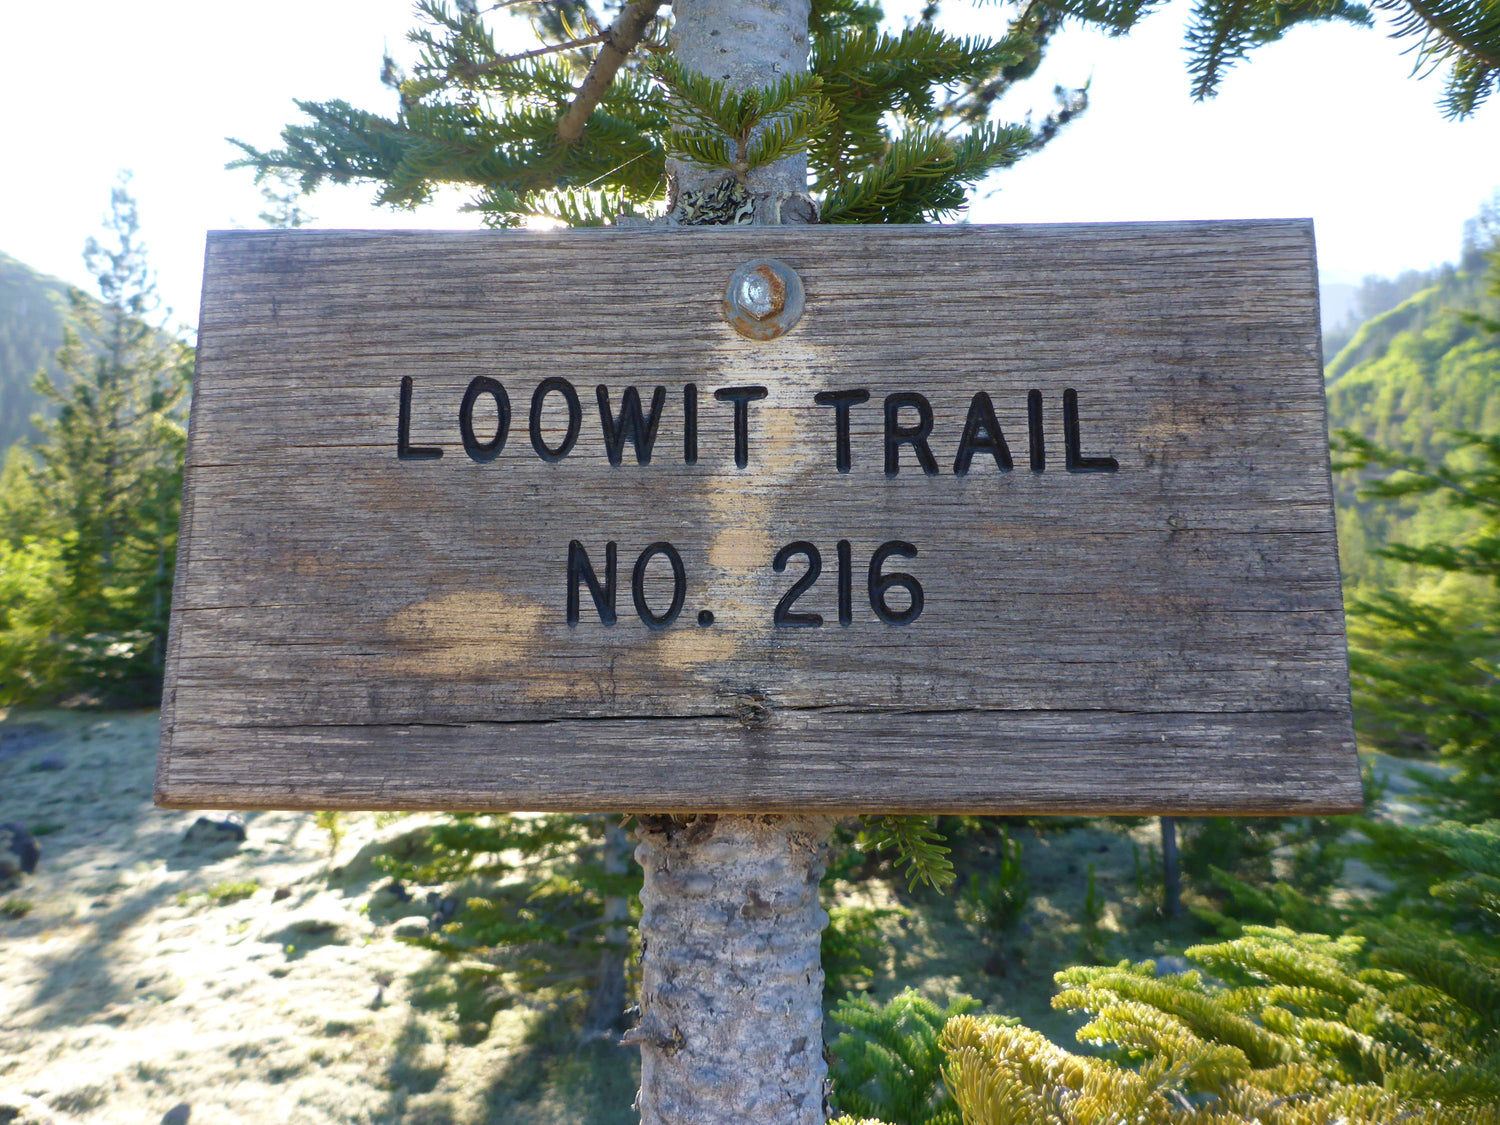 Your Guide to Hiking the Loowit Trail